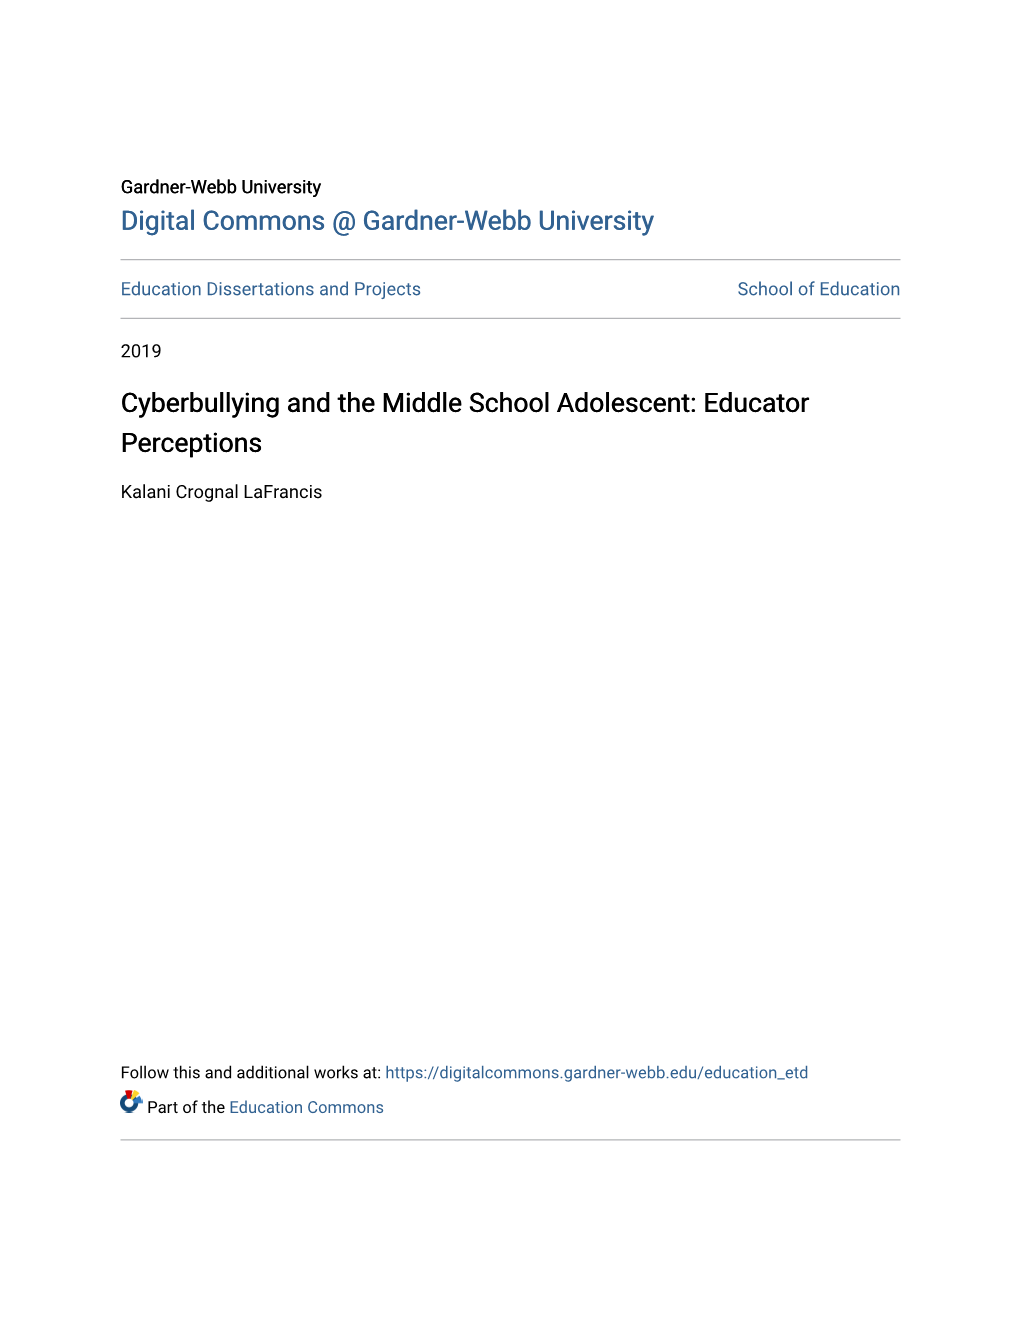 Cyberbullying and the Middle School Adolescent: Educator Perceptions